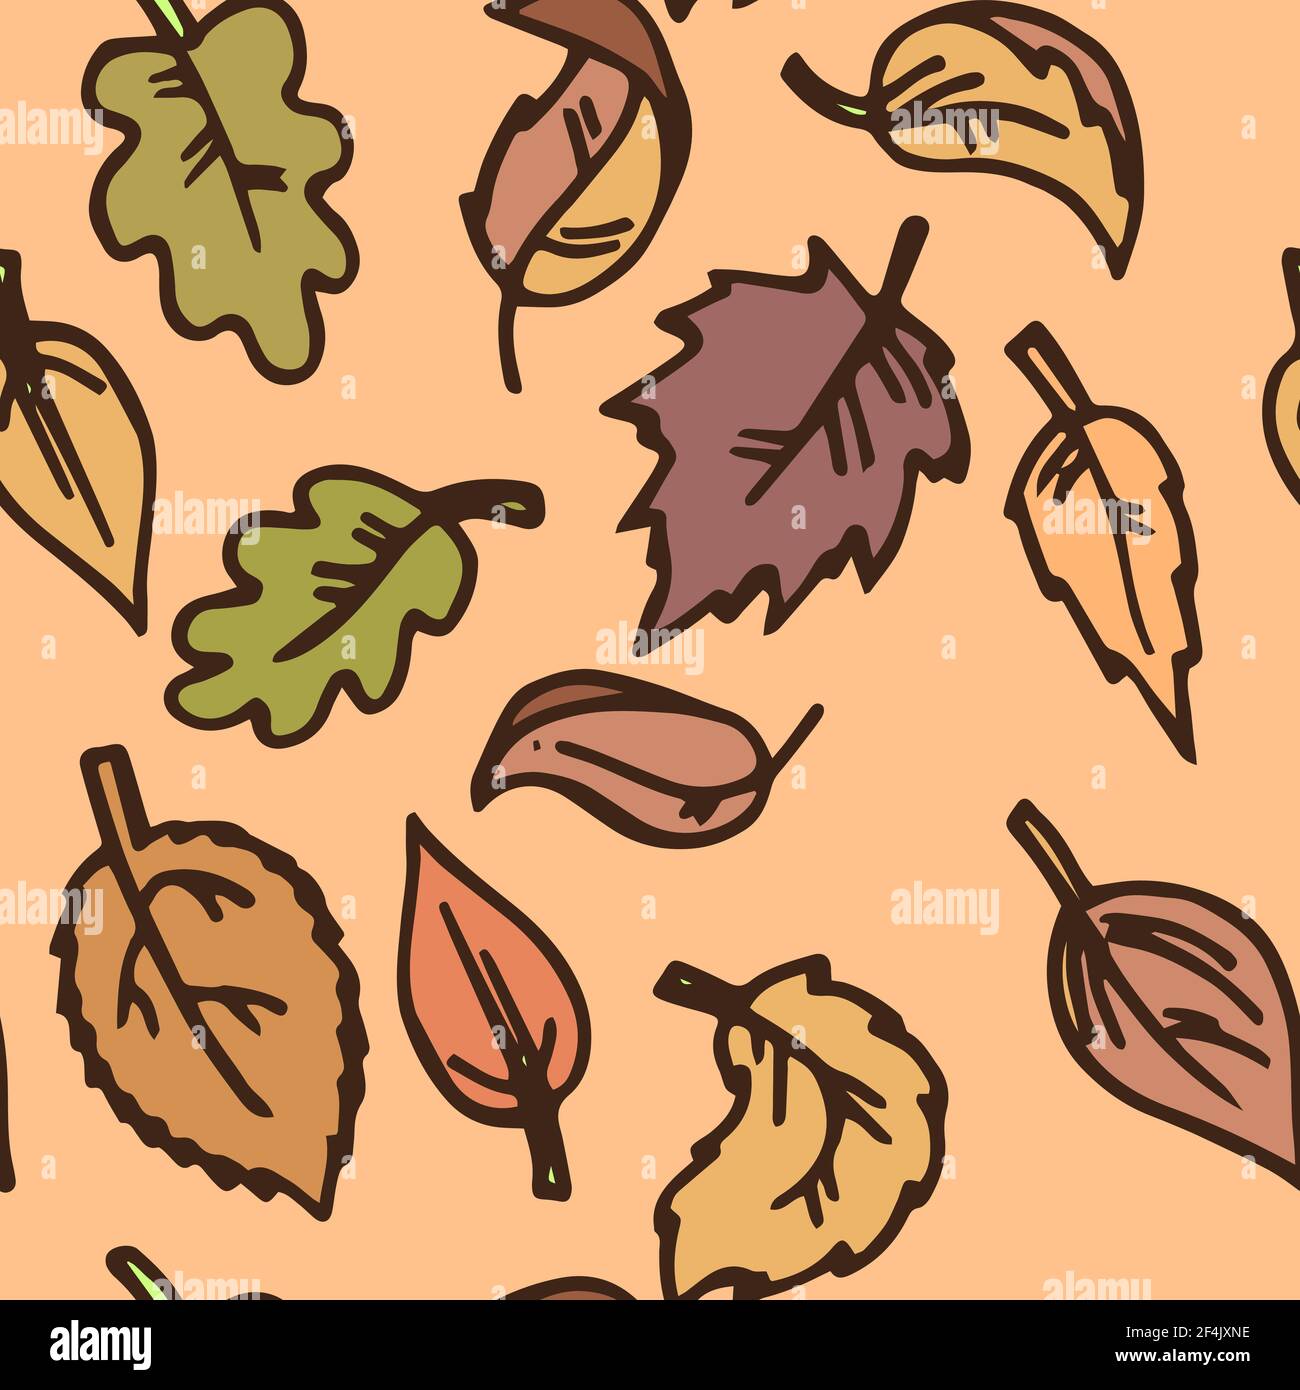 Foliage. Seamless illustration. Cartoon style sketch of leaves. Hand outline drawing funny plants. vector Stock Vector